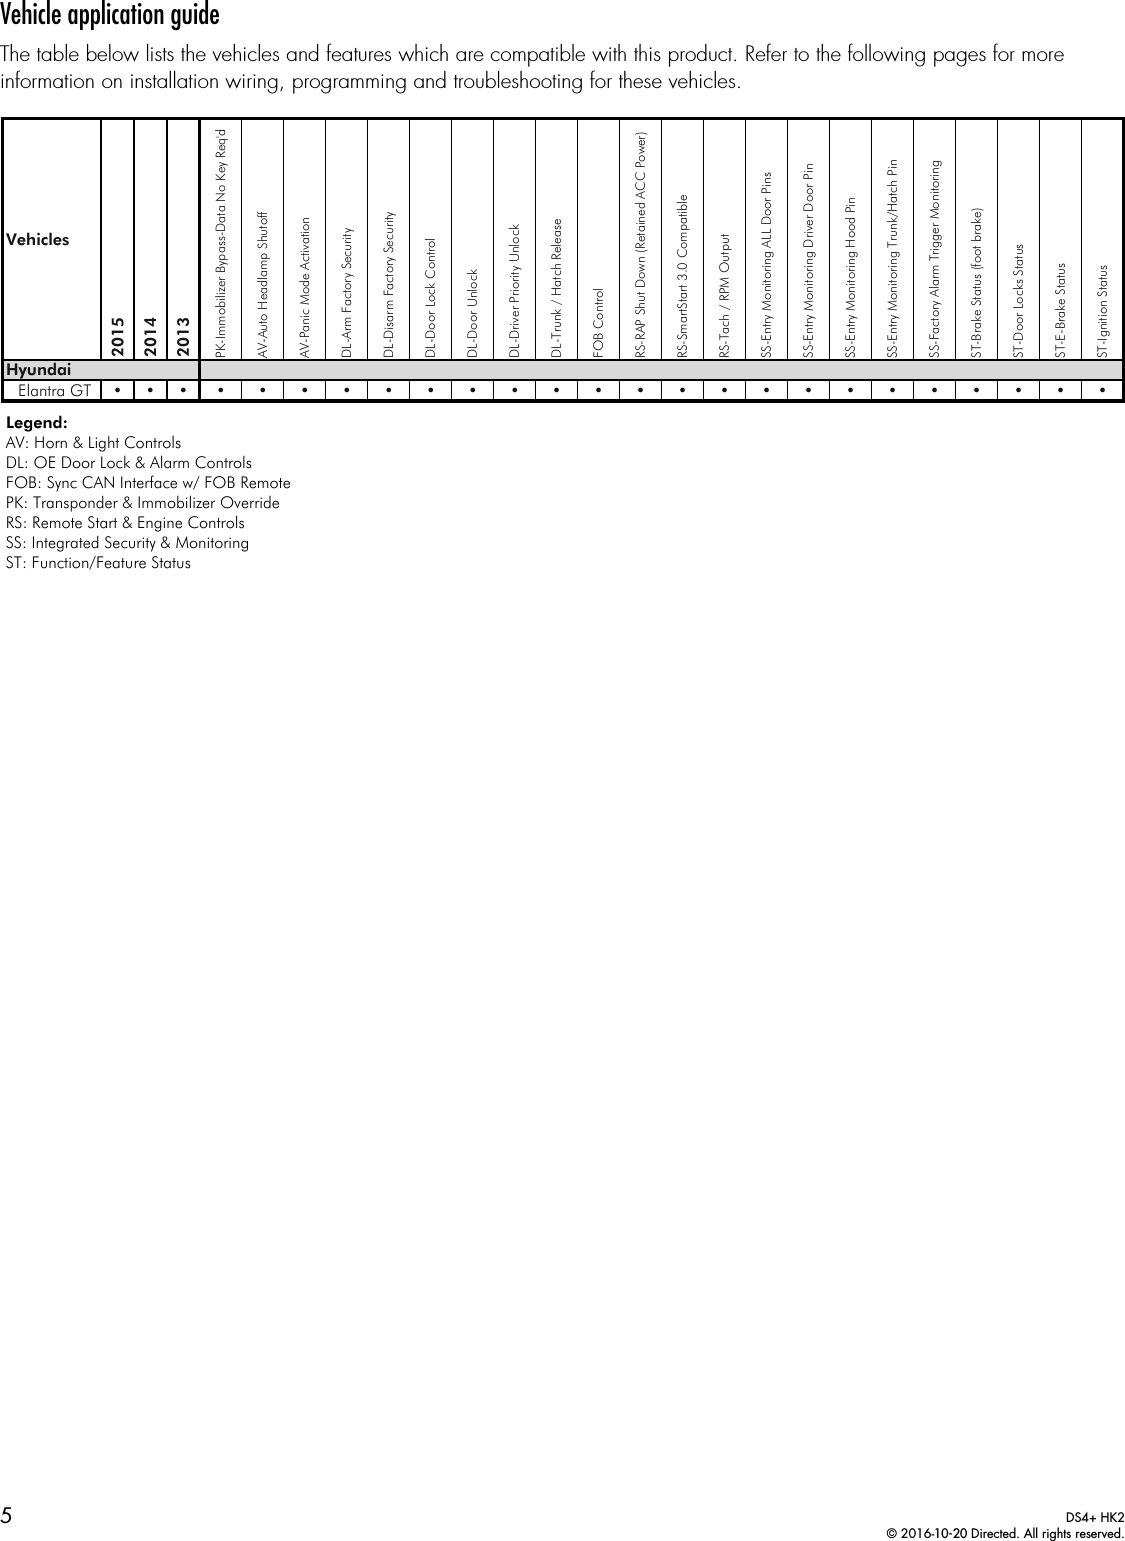 5DS4+ HK2© 2016-10-20 Directed. All rights reserved.Vehicle application guideThe table below lists the vehicles and features which are compatible with this product. Refer to the following pages for more information on installation wiring, programming and troubleshooting for these vehicles.Vehicles201520142013PK-Immobilizer Bypass-Data No Key Req&apos;dAV-Auto Headlamp ShutoffAV-Panic Mode ActivationDL-Arm Factory SecurityDL-Disarm Factory SecurityDL-Door Lock ControlDL-Door UnlockDL-Driver Priority UnlockDL-Trunk / Hatch ReleaseFOB ControlRS-RAP Shut Down (Retained ACC Power)RS-SmartStart 3.0 CompatibleRS-Tach / RPM OutputSS-Entry Monitoring ALL Door PinsSS-Entry Monitoring Driver Door PinSS-Entry Monitoring Hood PinSS-Entry Monitoring Trunk/Hatch PinSS-Factory Alarm Trigger MonitoringST-Brake Status (foot brake)ST-Door Locks StatusST-E-Brake StatusST-Ignition StatusHyundaiElantra GT • • •••••••••••••••••••••••Legend:AV: Horn &amp; Light ControlsDL: OE Door Lock &amp; Alarm ControlsFOB: Sync CAN Interface w/ FOB RemotePK: Transponder &amp; Immobilizer OverrideRS: Remote Start &amp; Engine ControlsSS: Integrated Security &amp; MonitoringST: Function/Feature Status